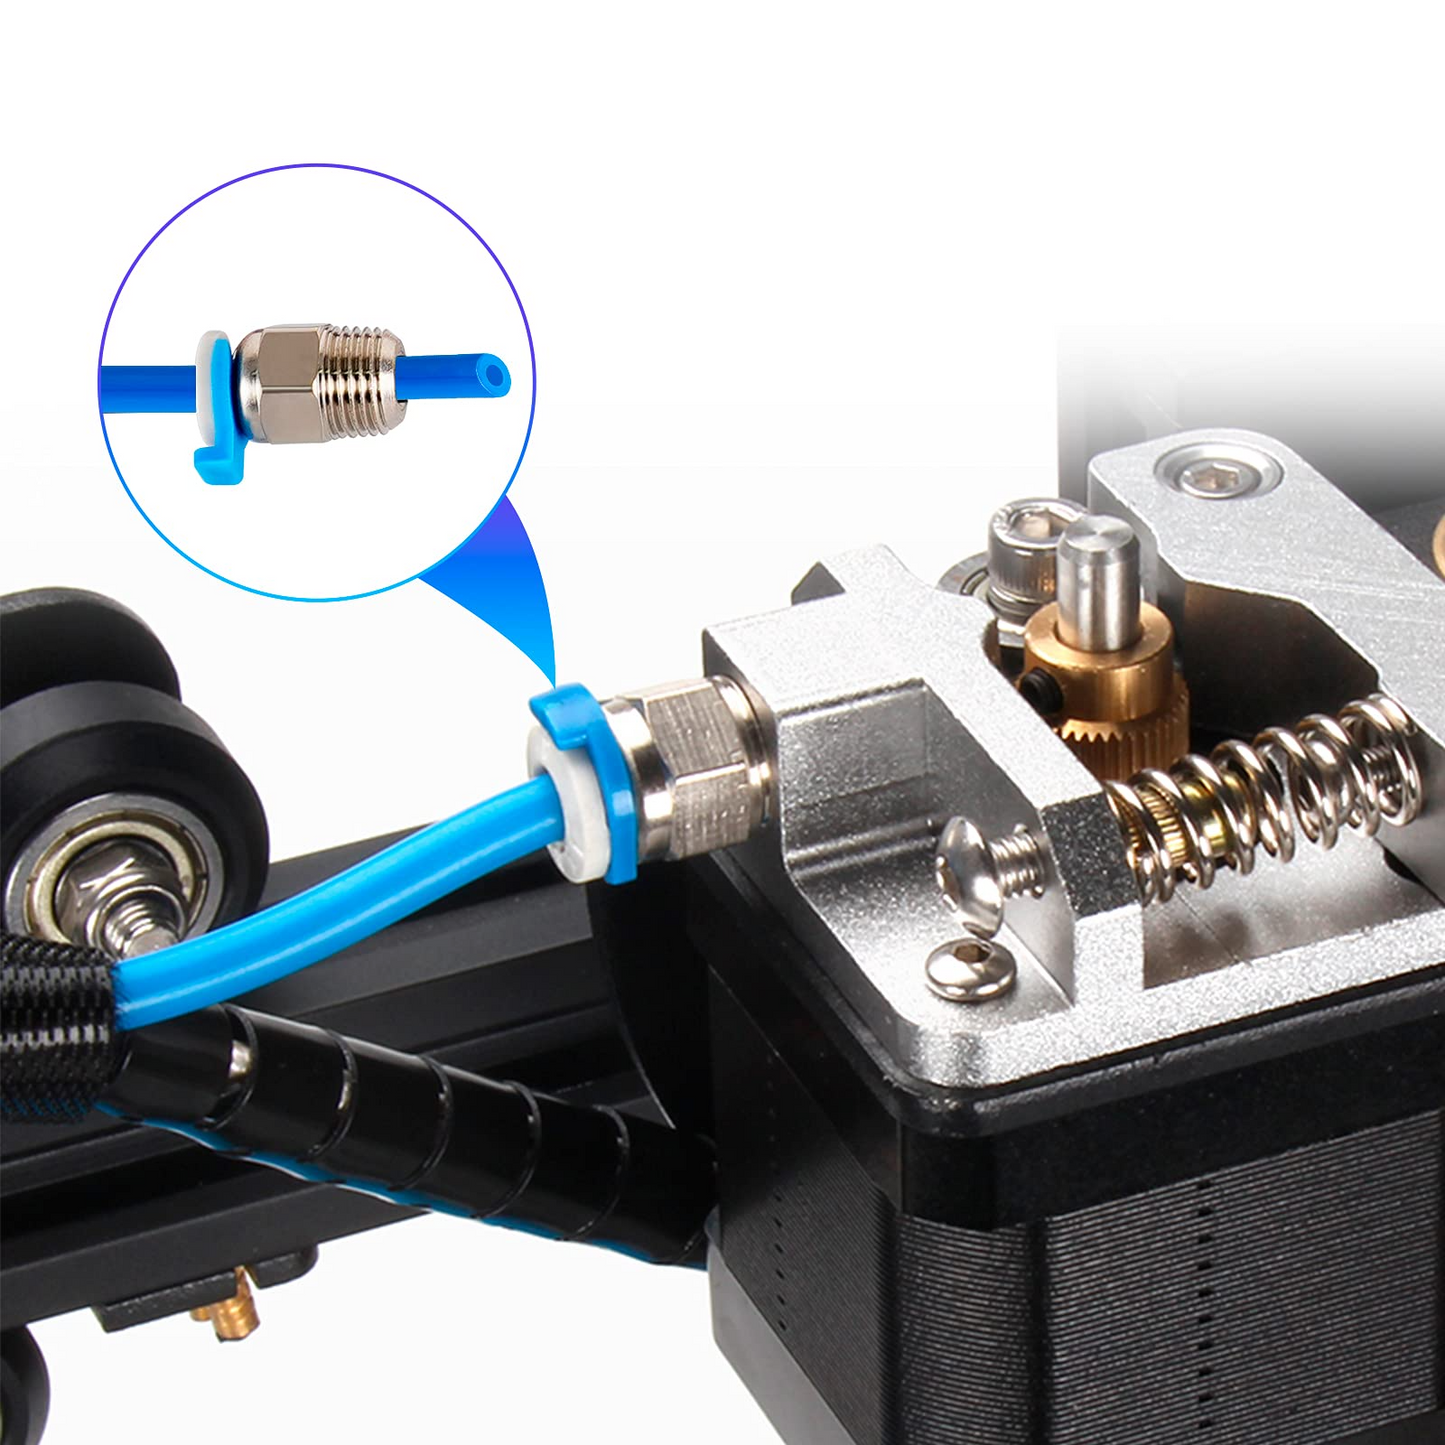 Left and Right Dual Gear Pro Aluminum Extruder and Bed Upgrade Kit Feed 3D